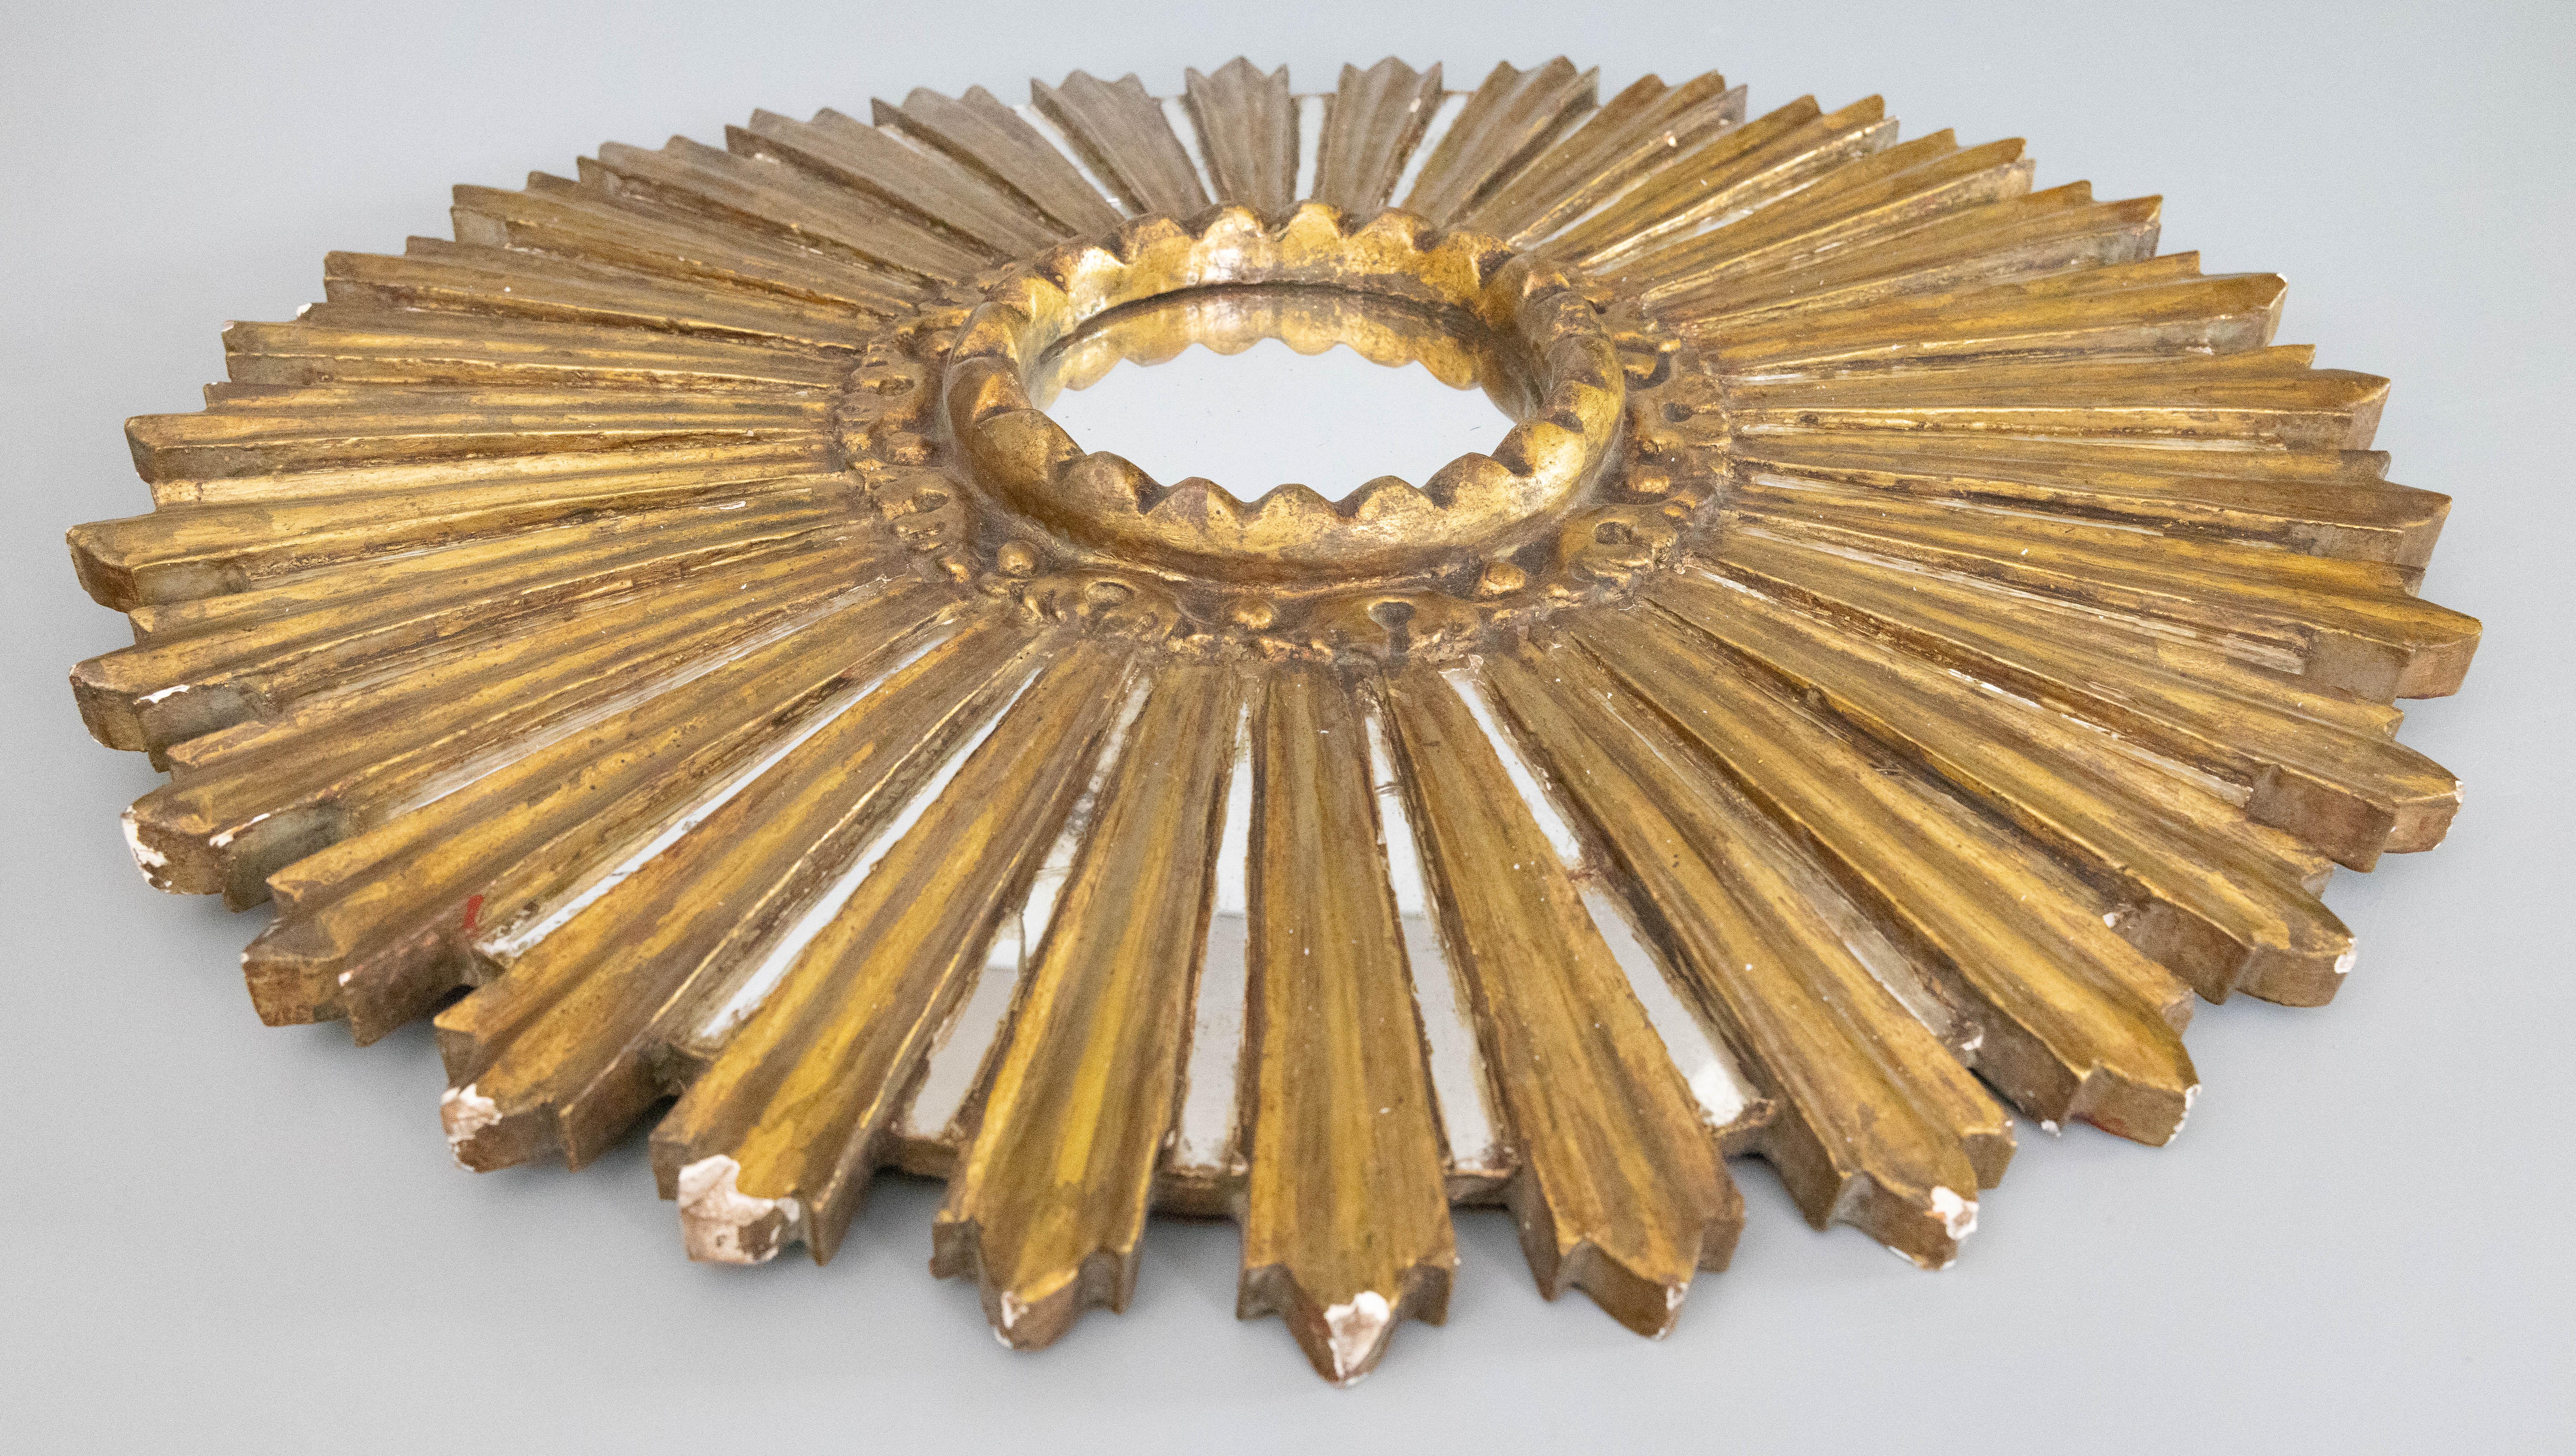 A beautifully carved antique early 20th-Century French giltwood sunburst starburst mirror with the original mirror glass. The lovely gilt patina, antique mirror glass, and finely carved rays make this mirror a rare find. It would make a gorgeous